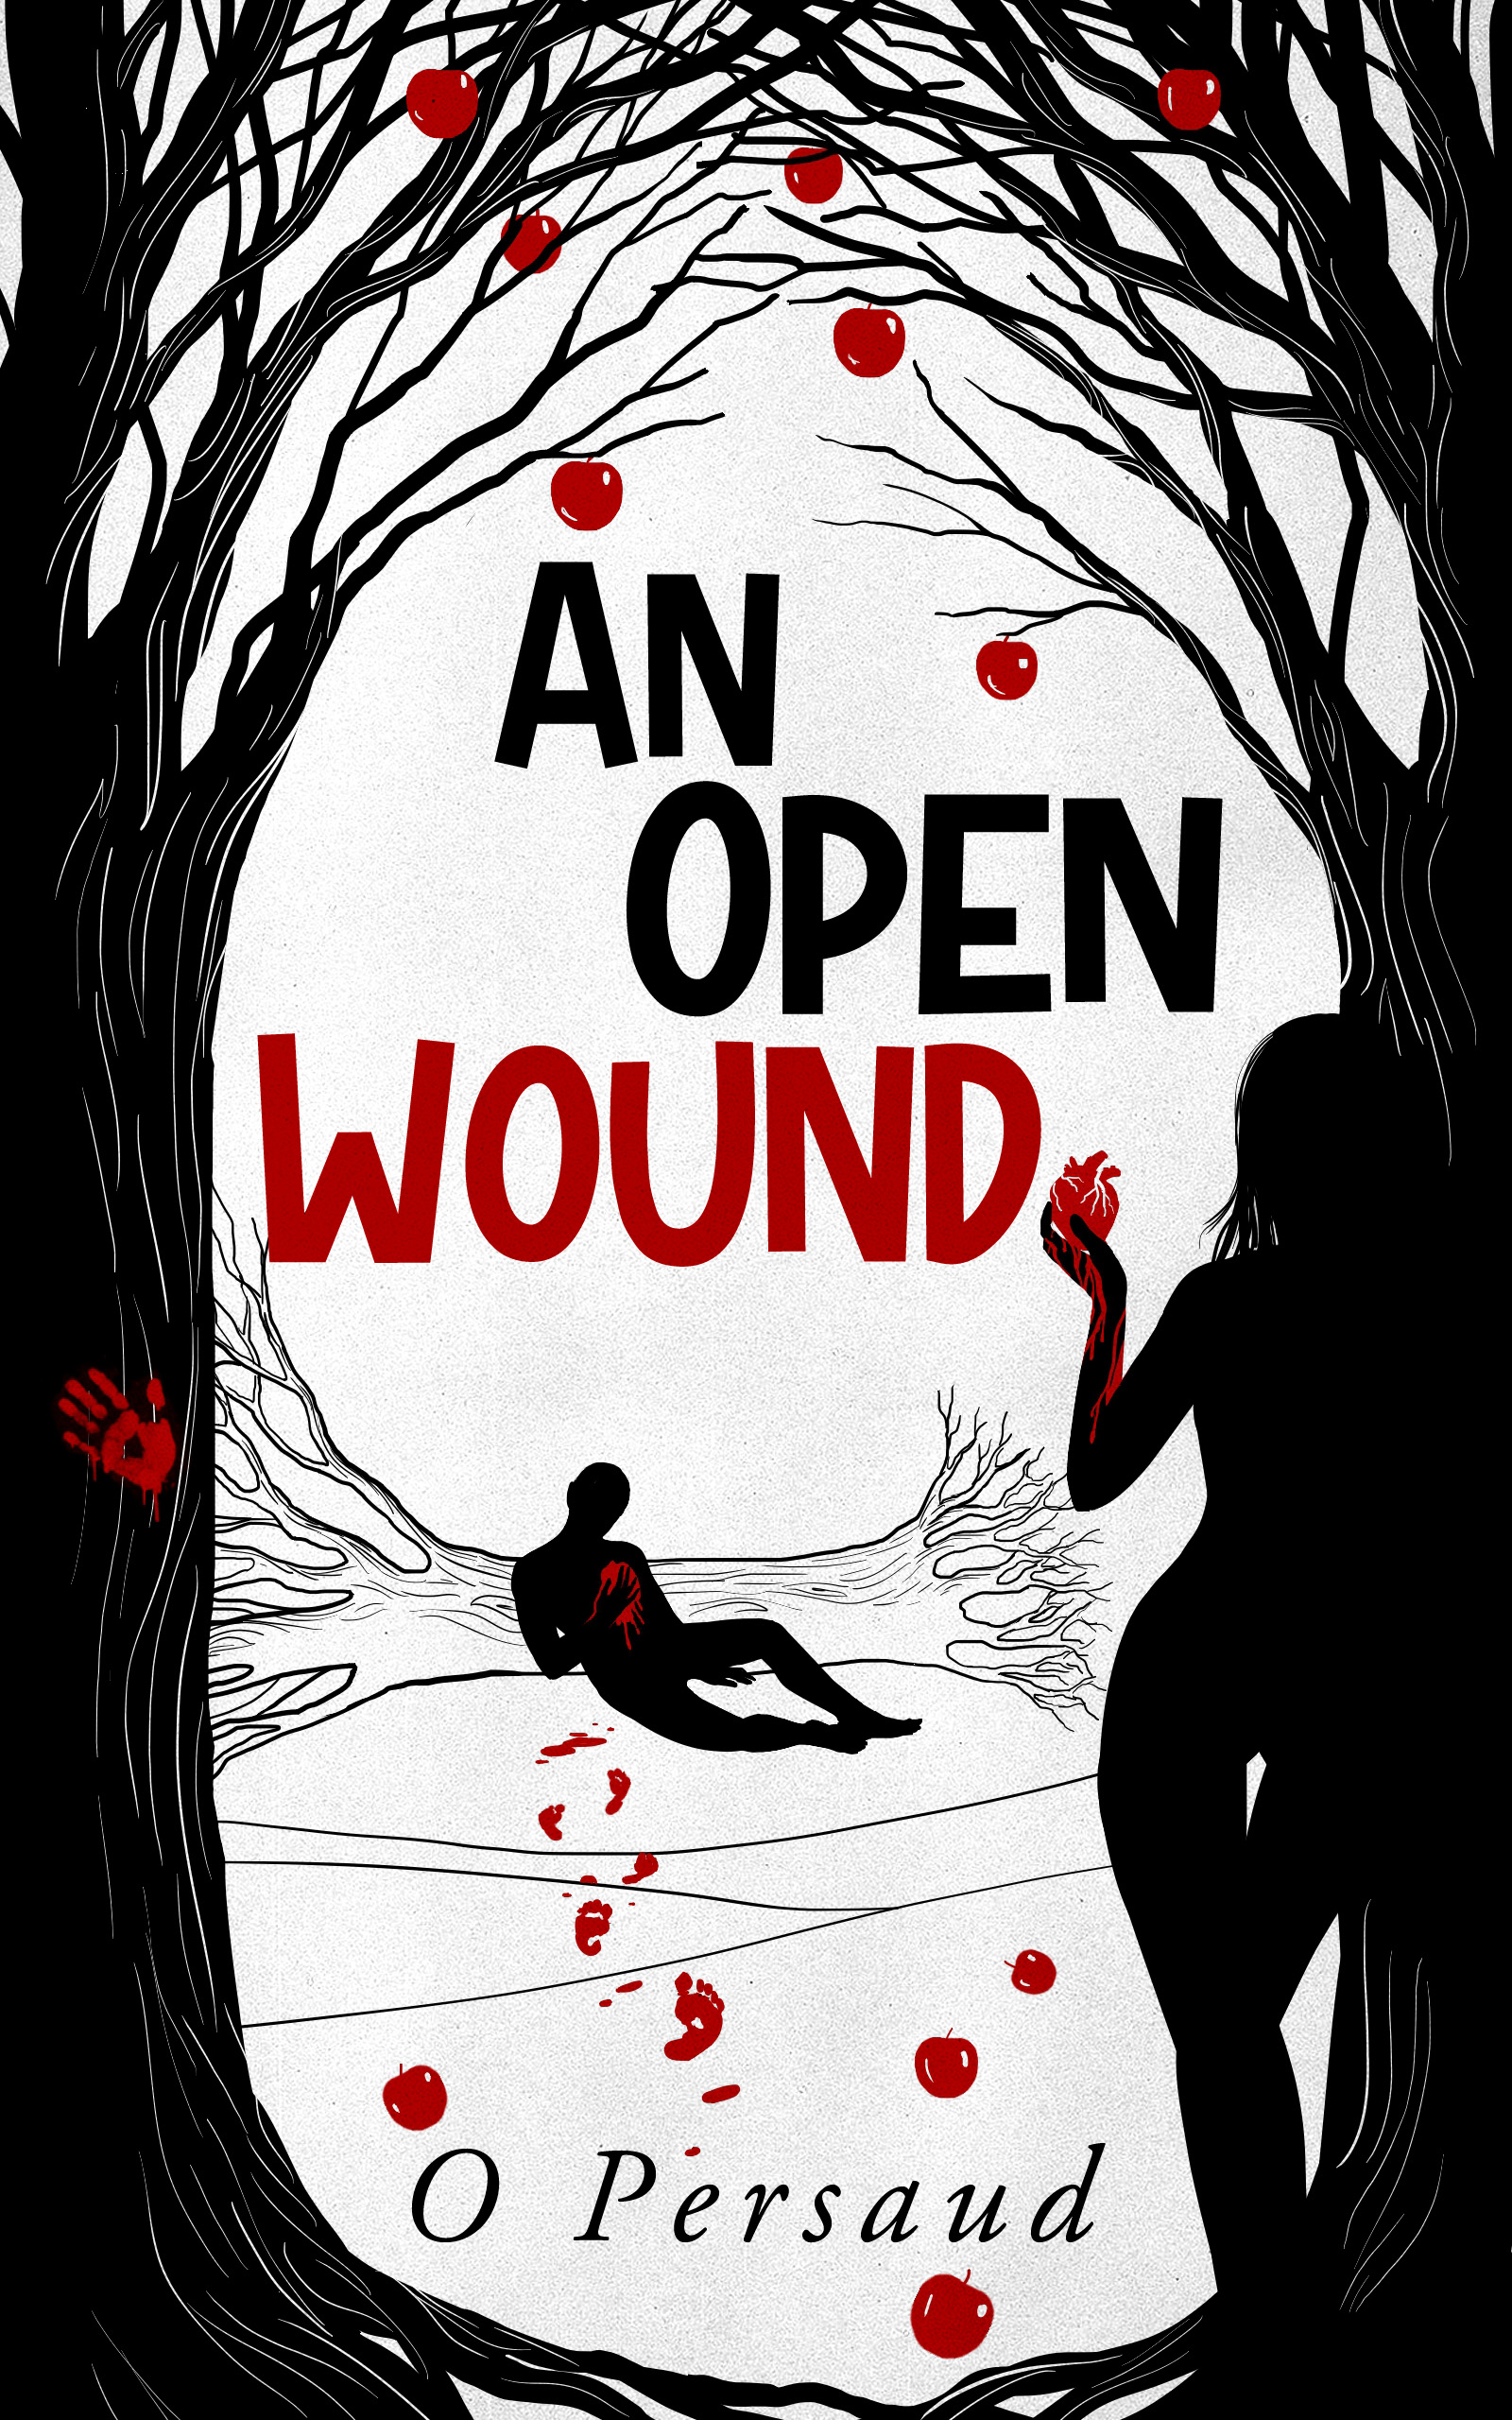 FREE: An Open Wound by O Persaud